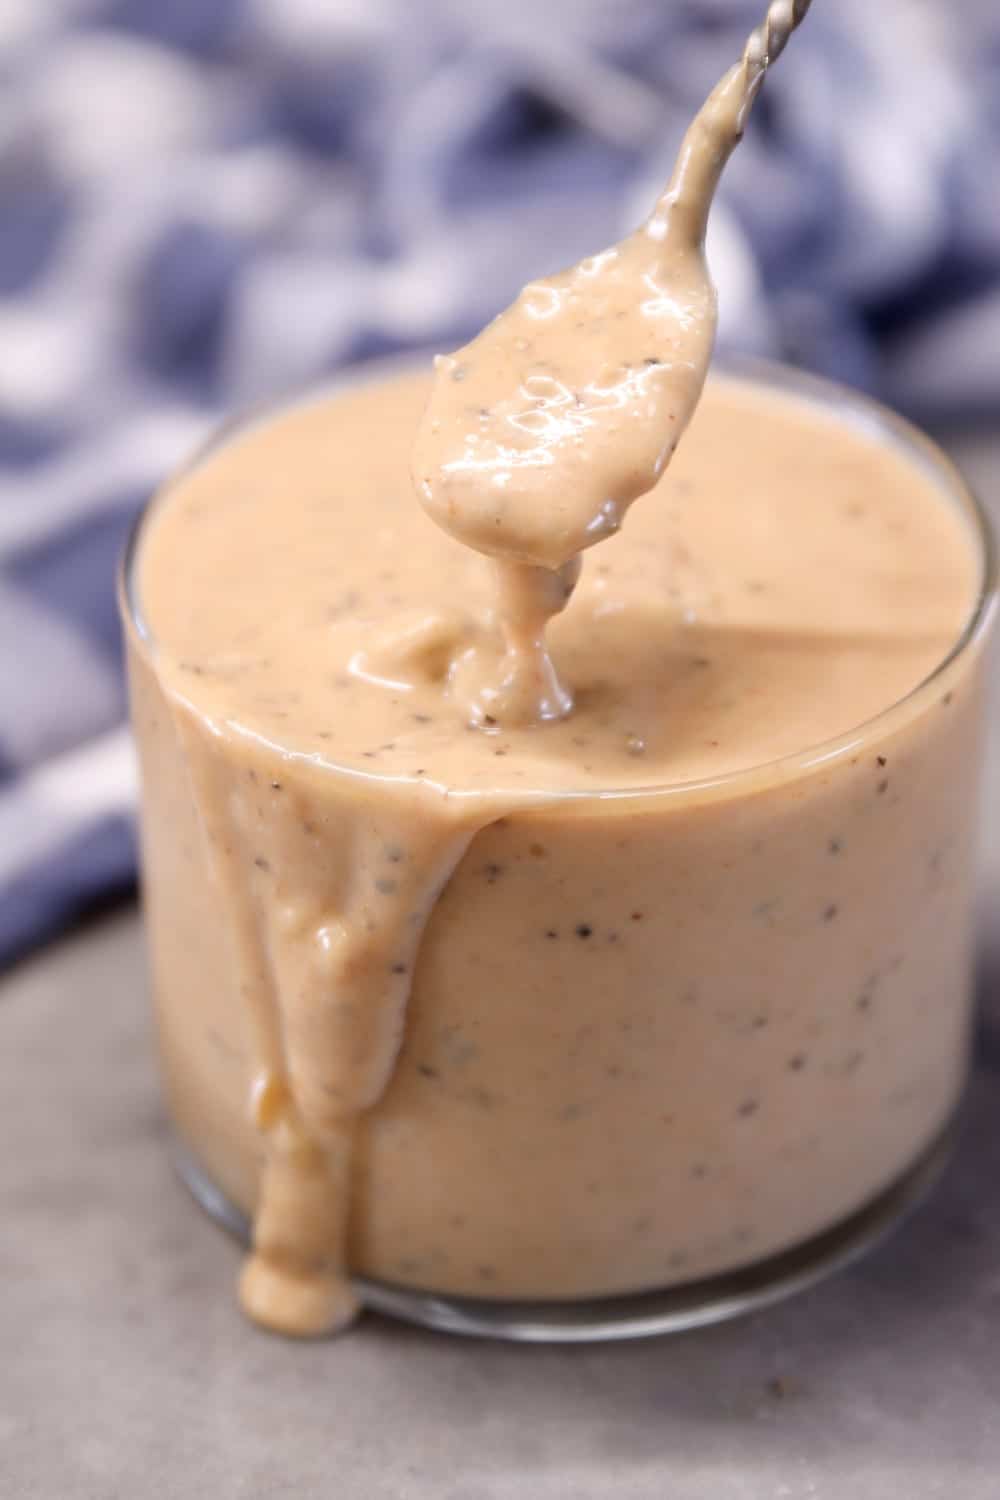 Burger Sauce in a jar with a spoon dipping the sauce